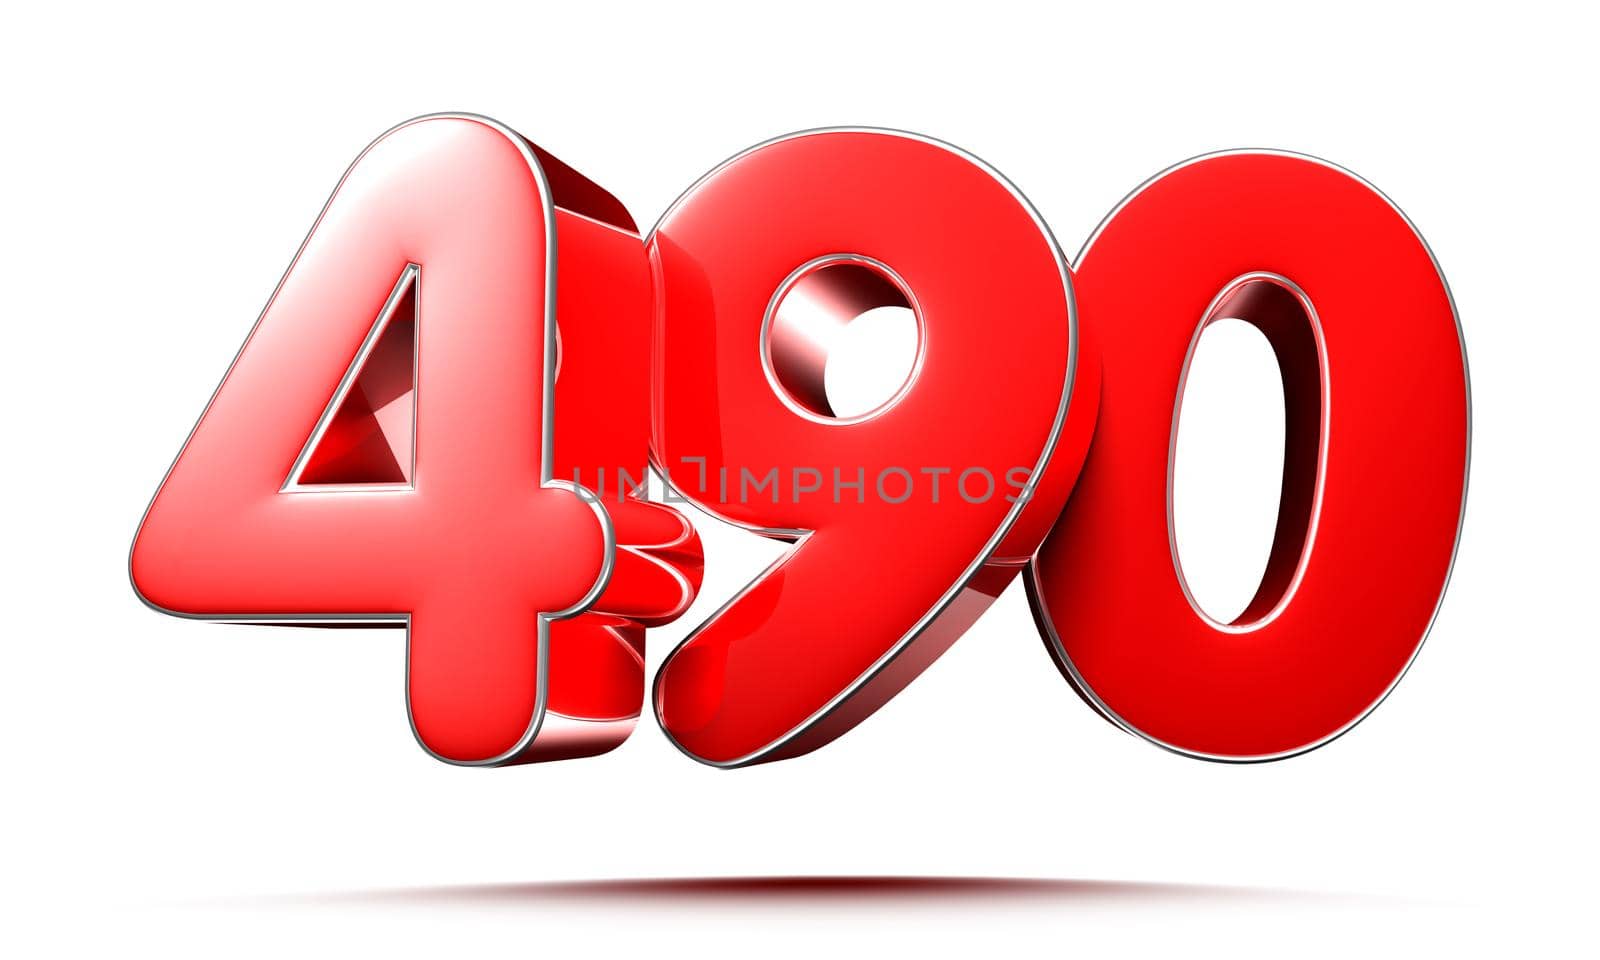 Rounded red numbers 490 on white background 3D illustration with clipping path